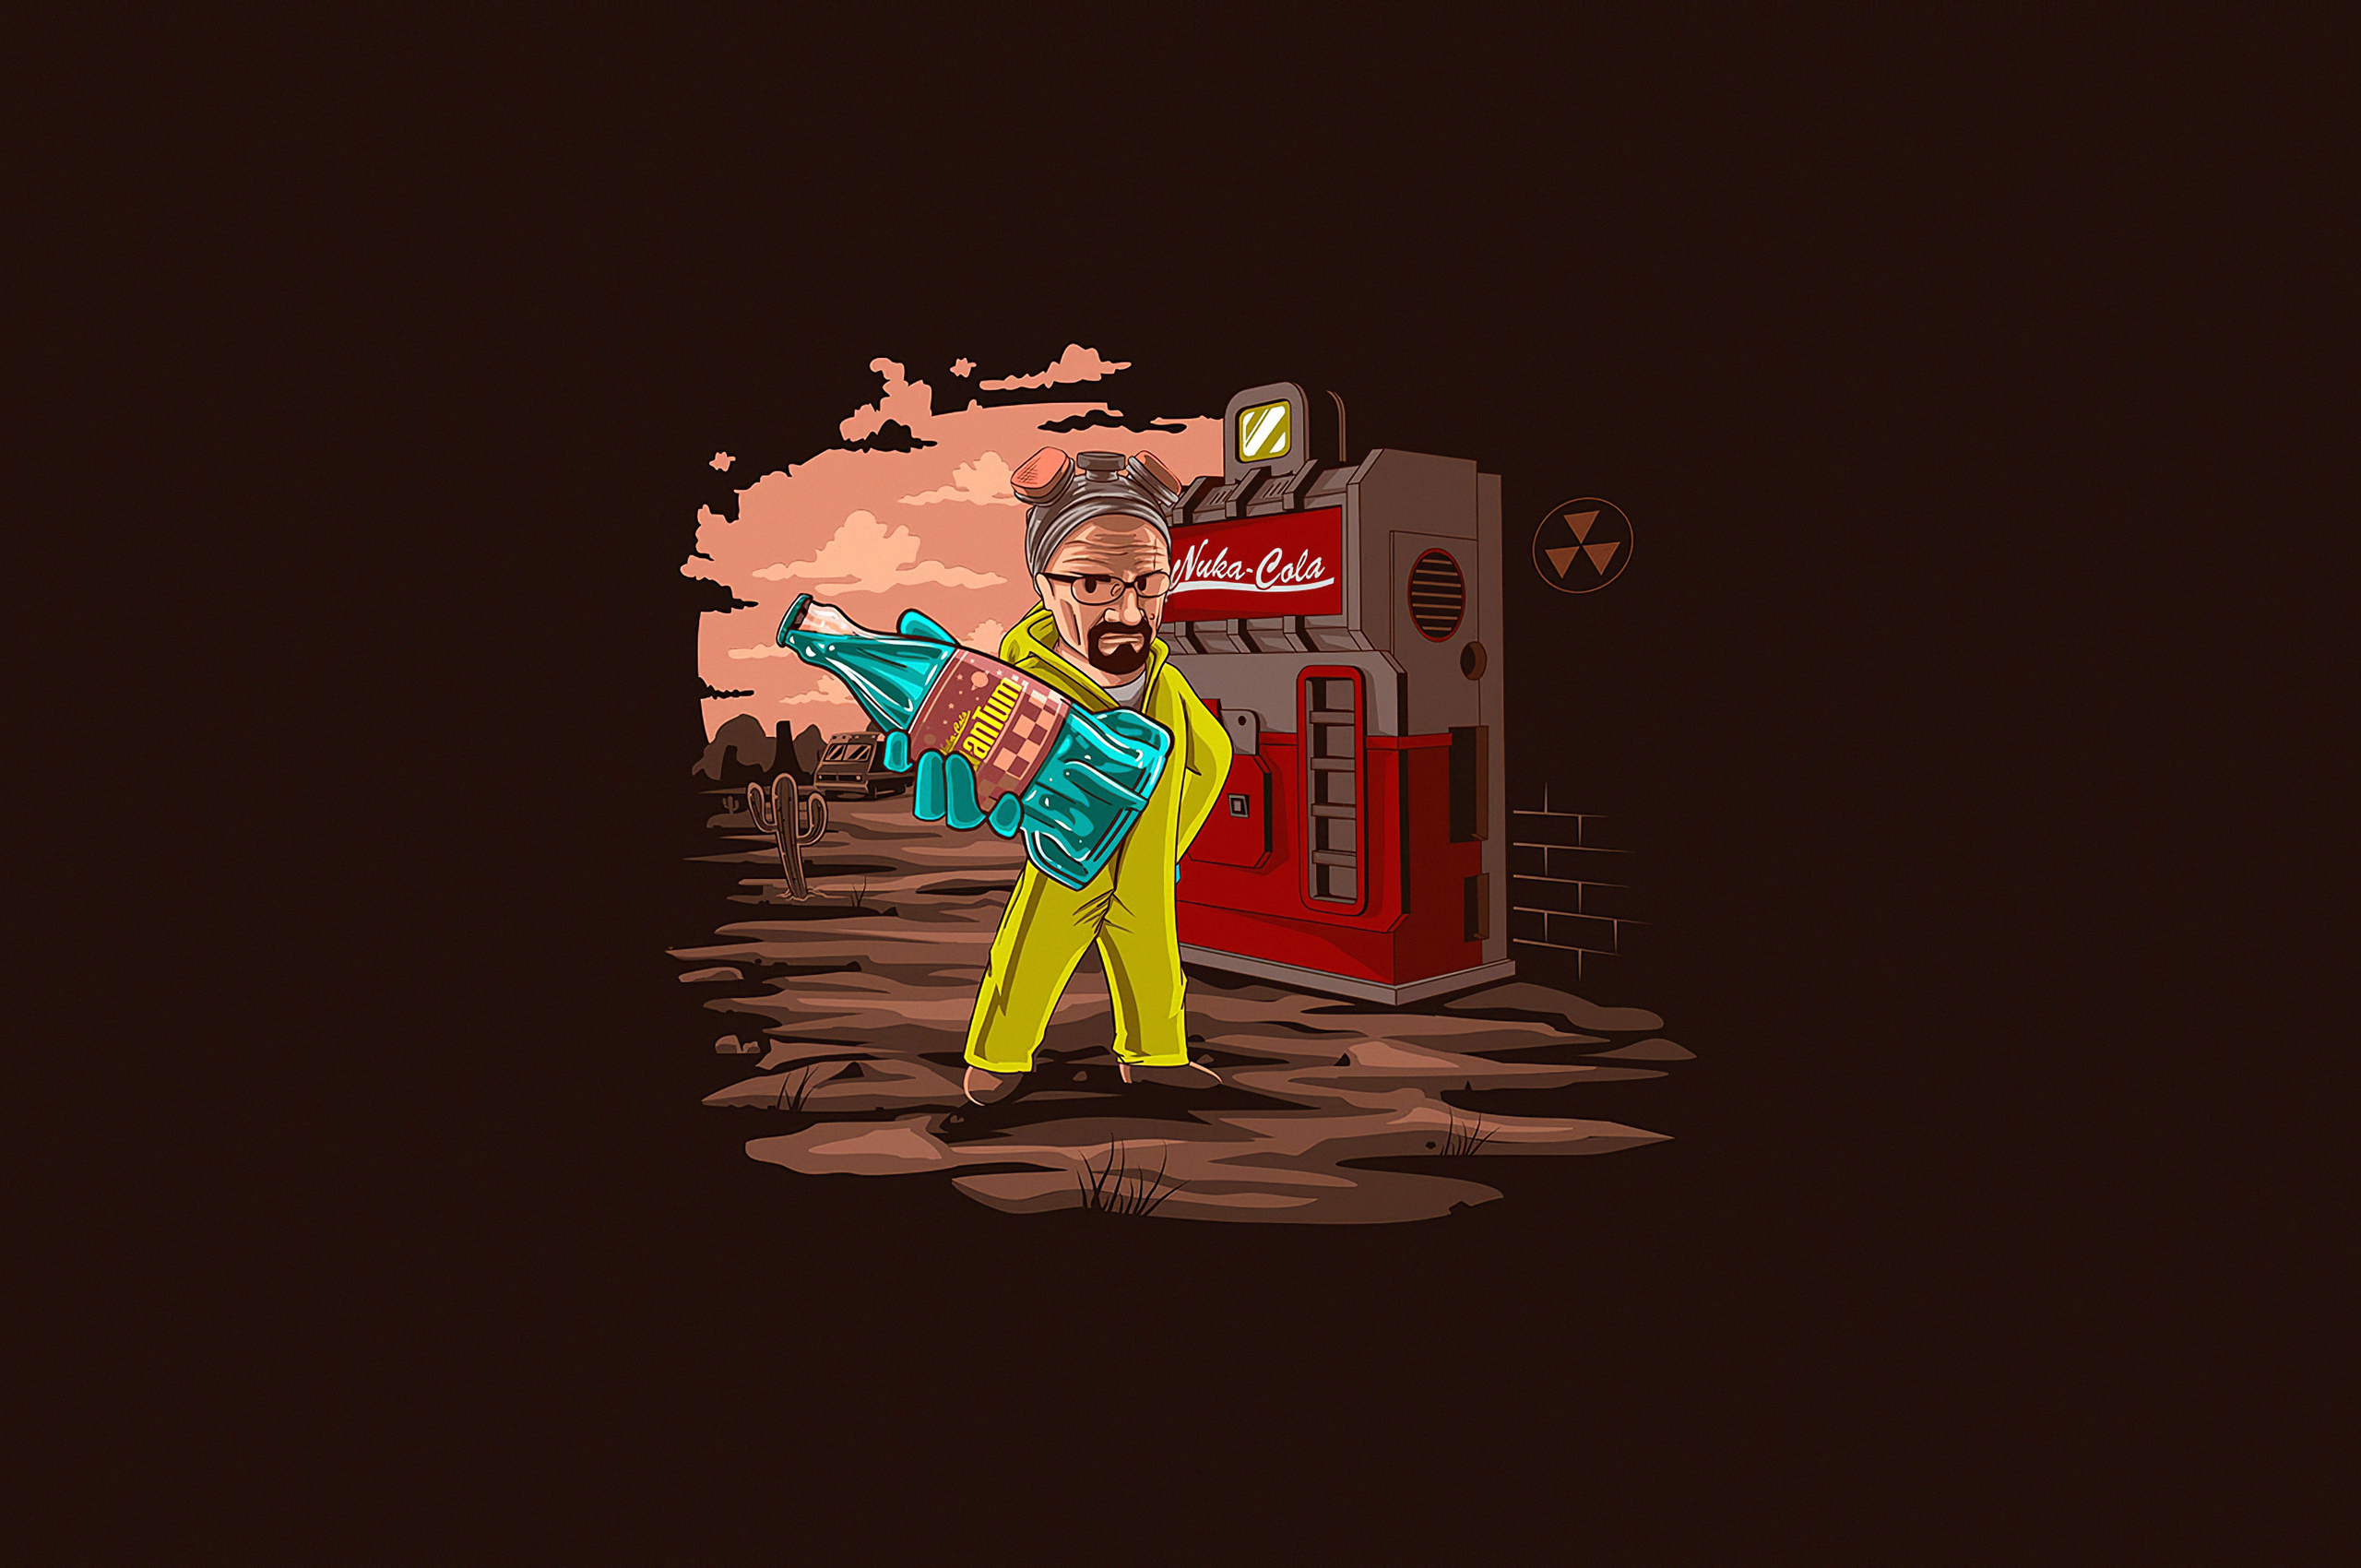 Walter White Fallout 4 In 2560x1700 Resolution. walter-white-fallout-4-c8.j...